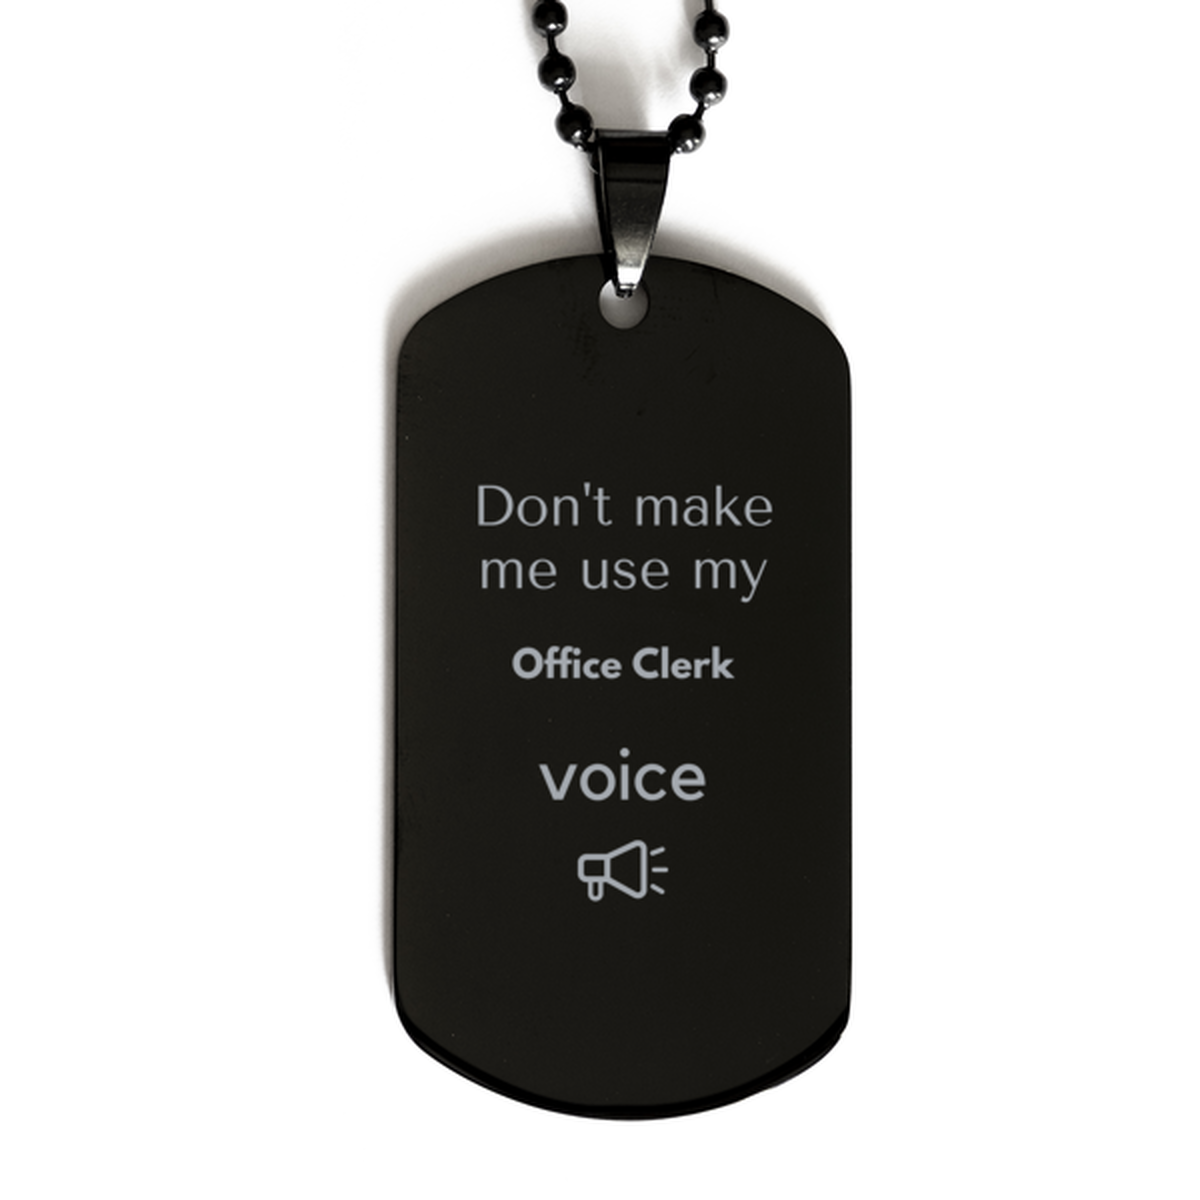 Don't make me use my Office Clerk voice, Sarcasm Office Clerk Gifts, Christmas Office Clerk Black Dog Tag Birthday Unique Gifts For Office Clerk Coworkers, Men, Women, Colleague, Friends